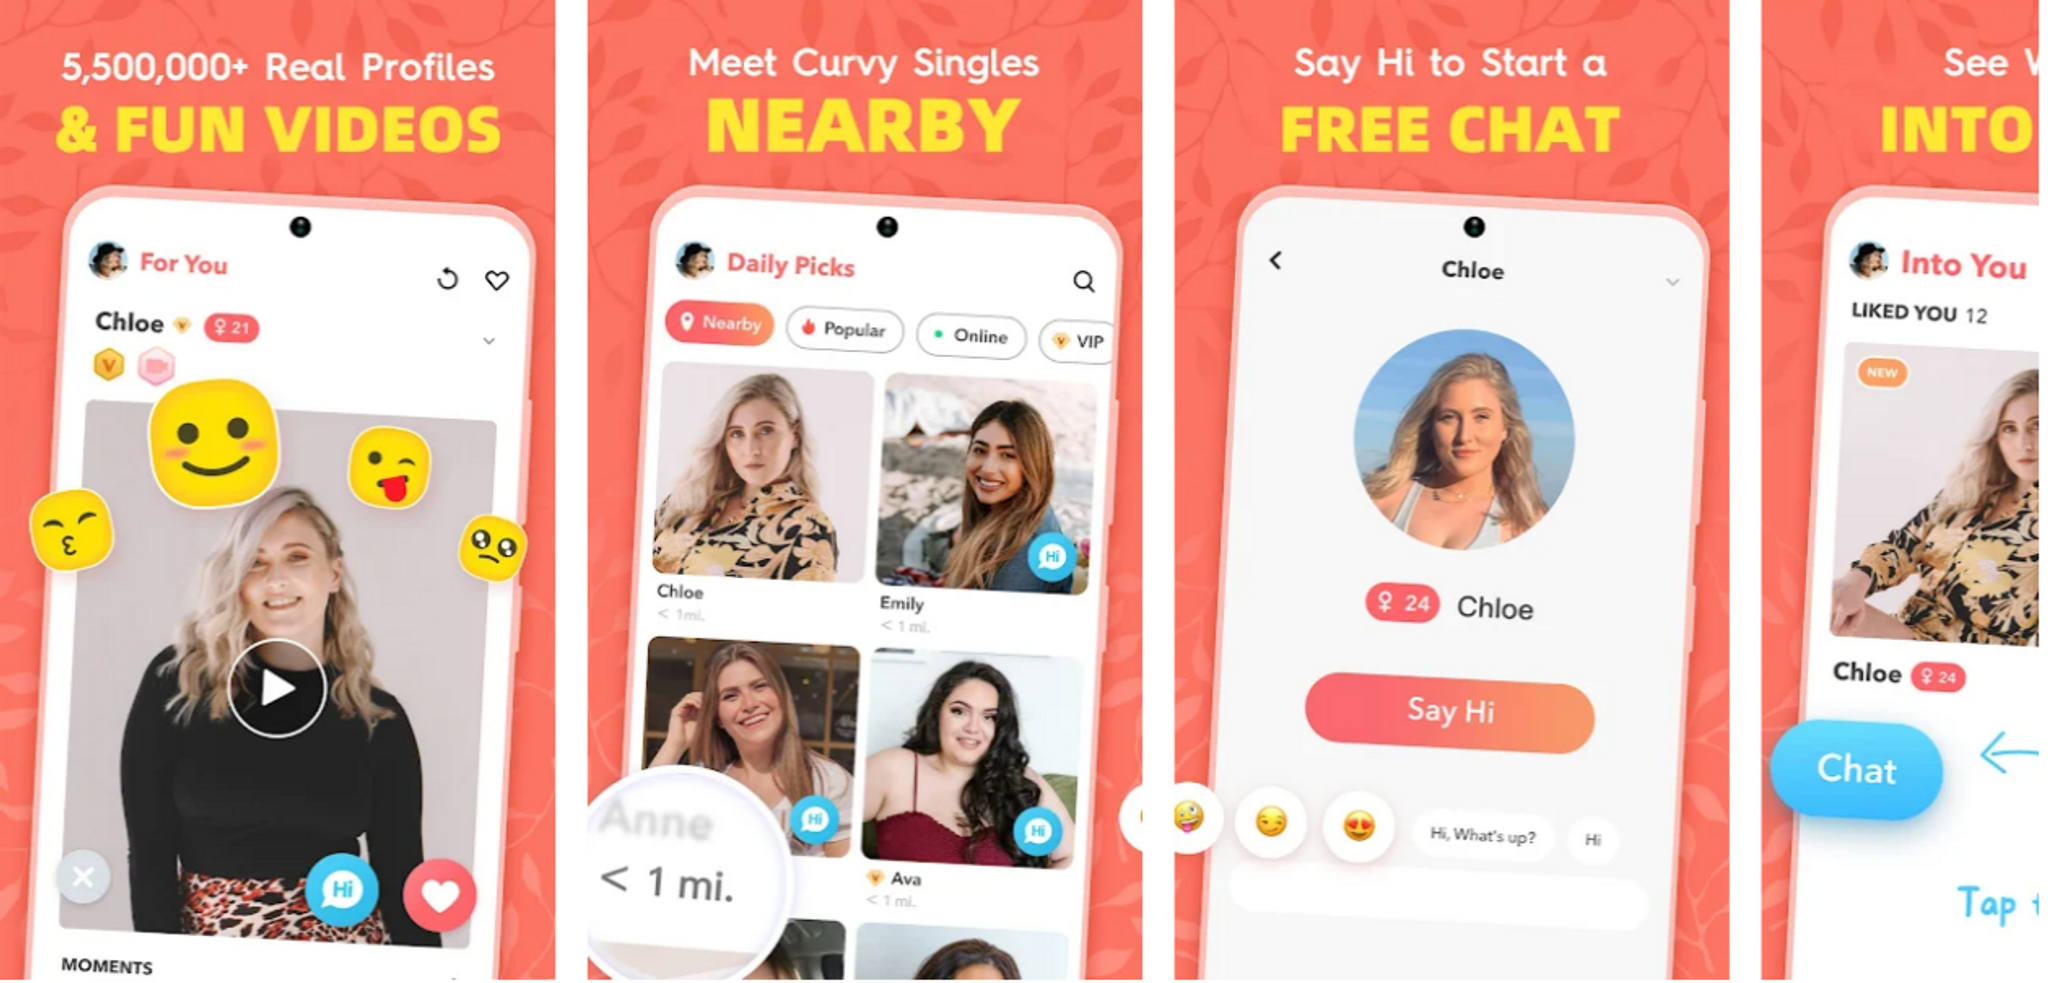 WooPlus is one of the top plus-size dating apps